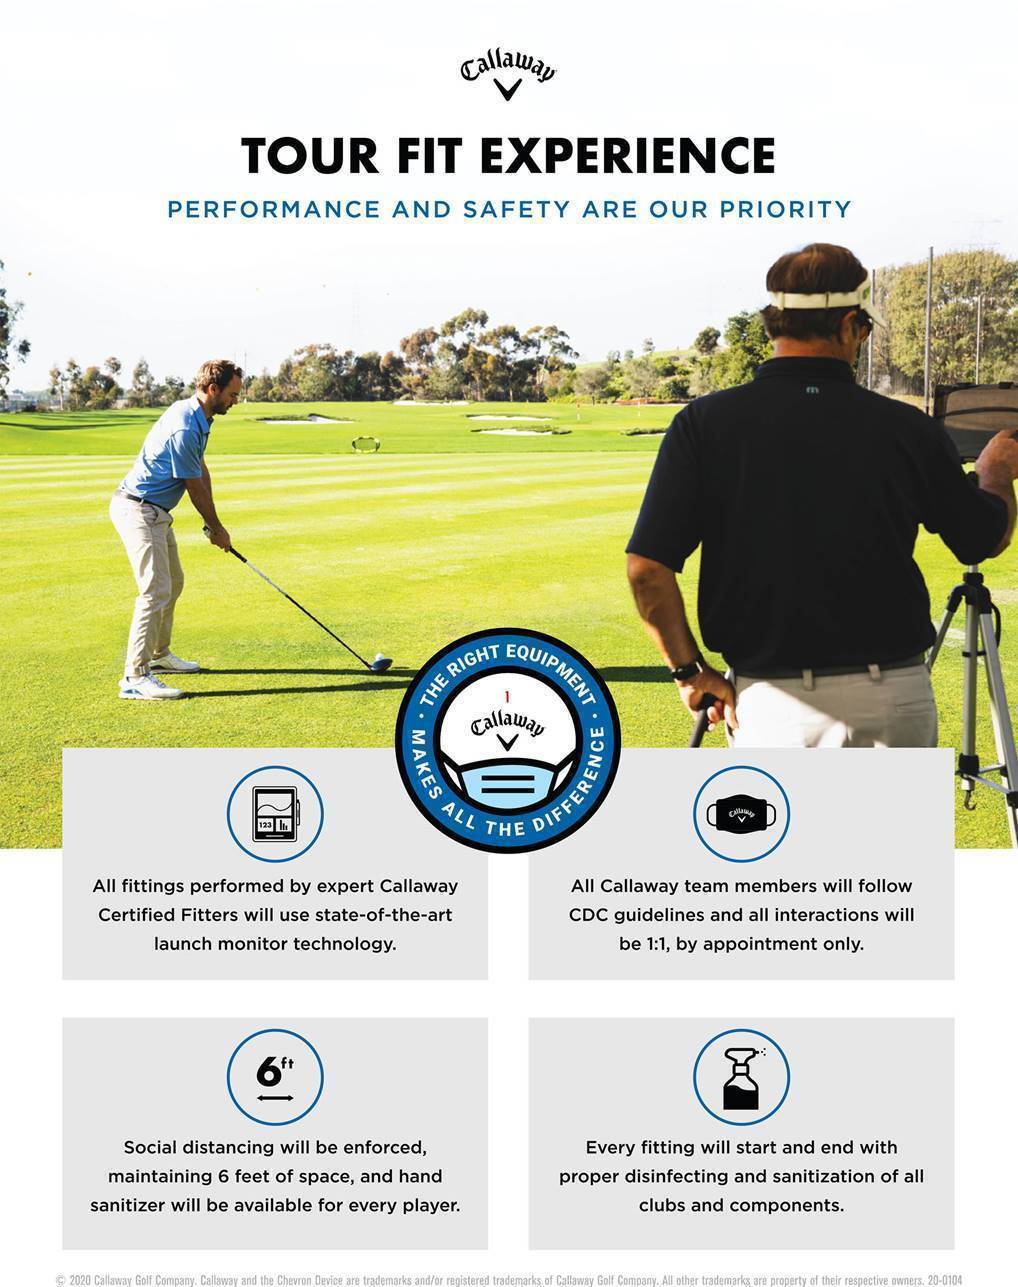 Callaway Tour Fit Experience